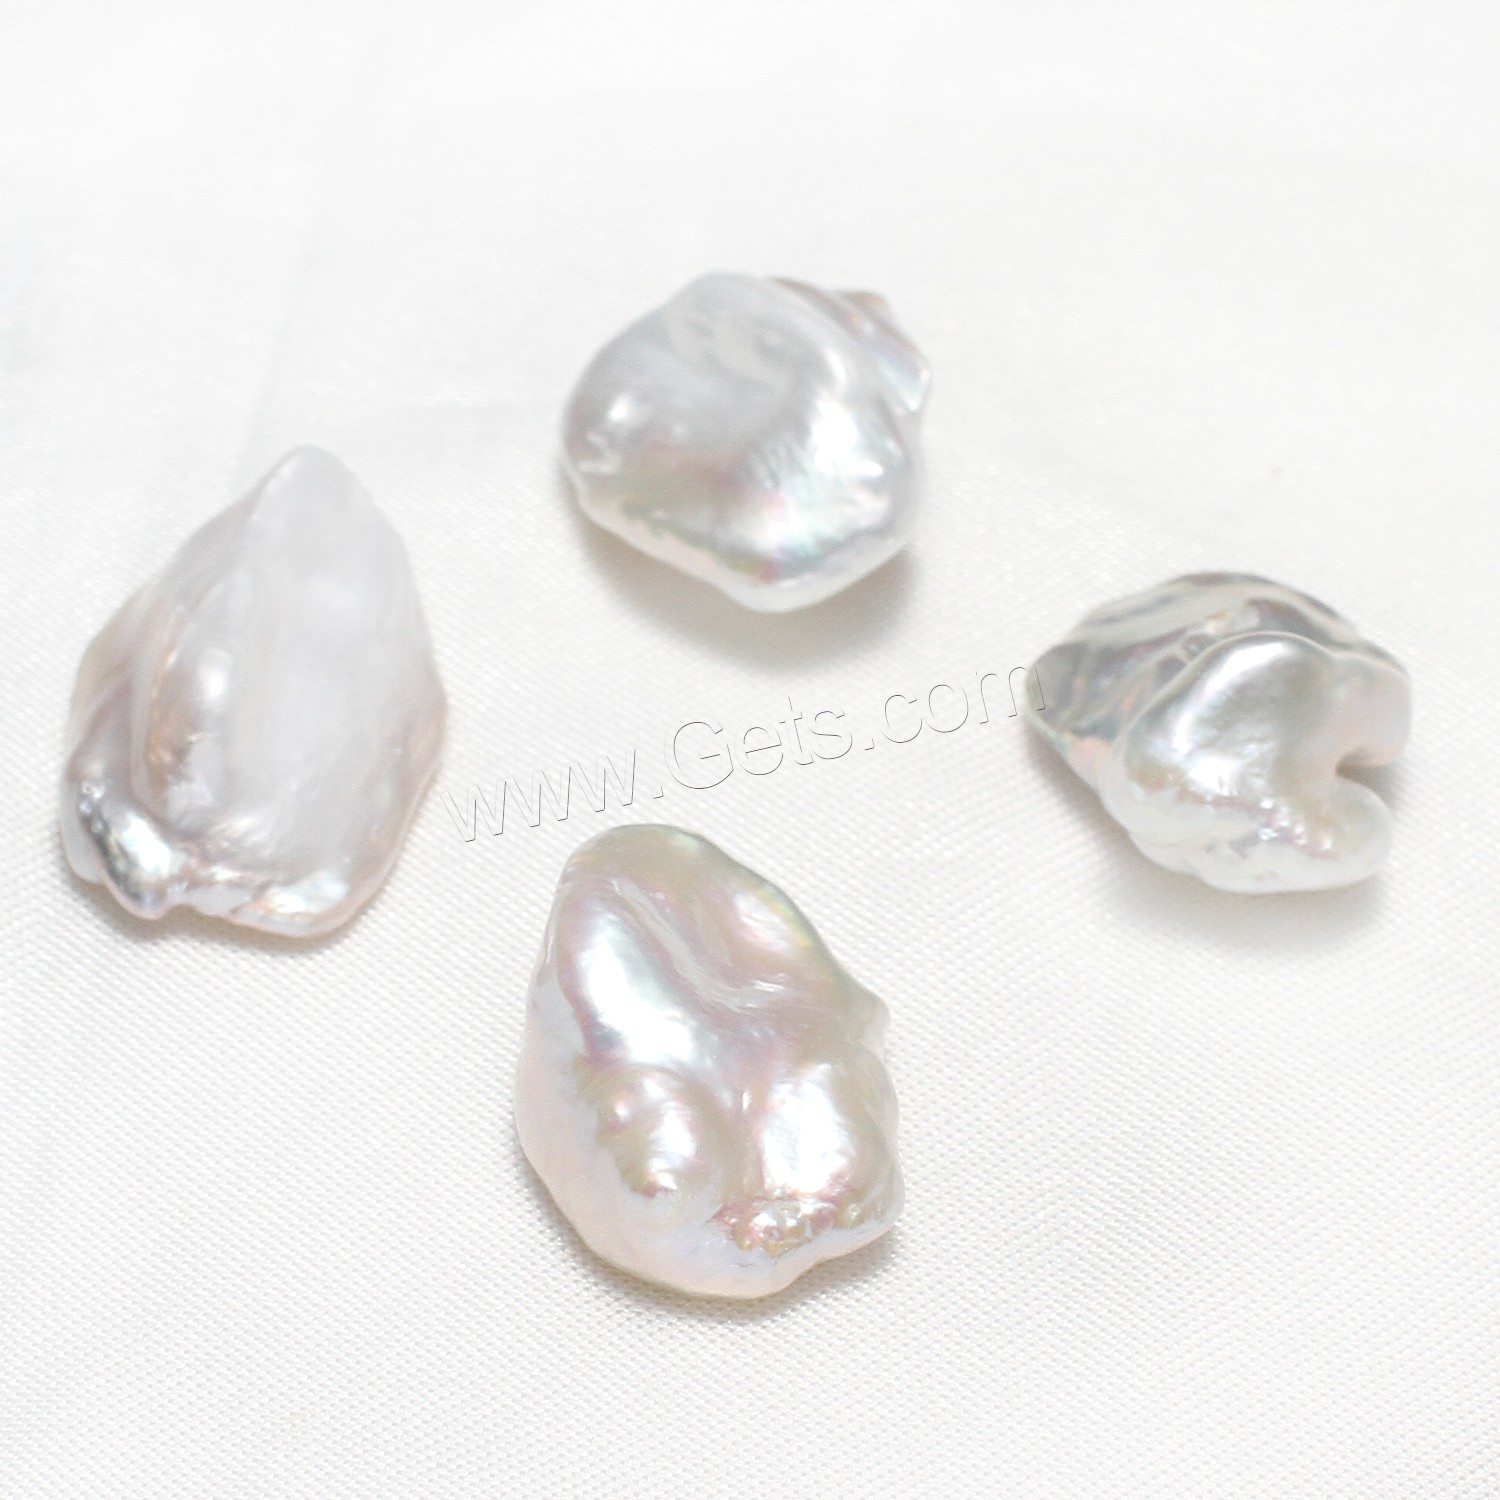 No Hole Cultured Freshwater Pearl Beads, natural, different size for choice, white, 10PCs/Bag, Sold By Bag